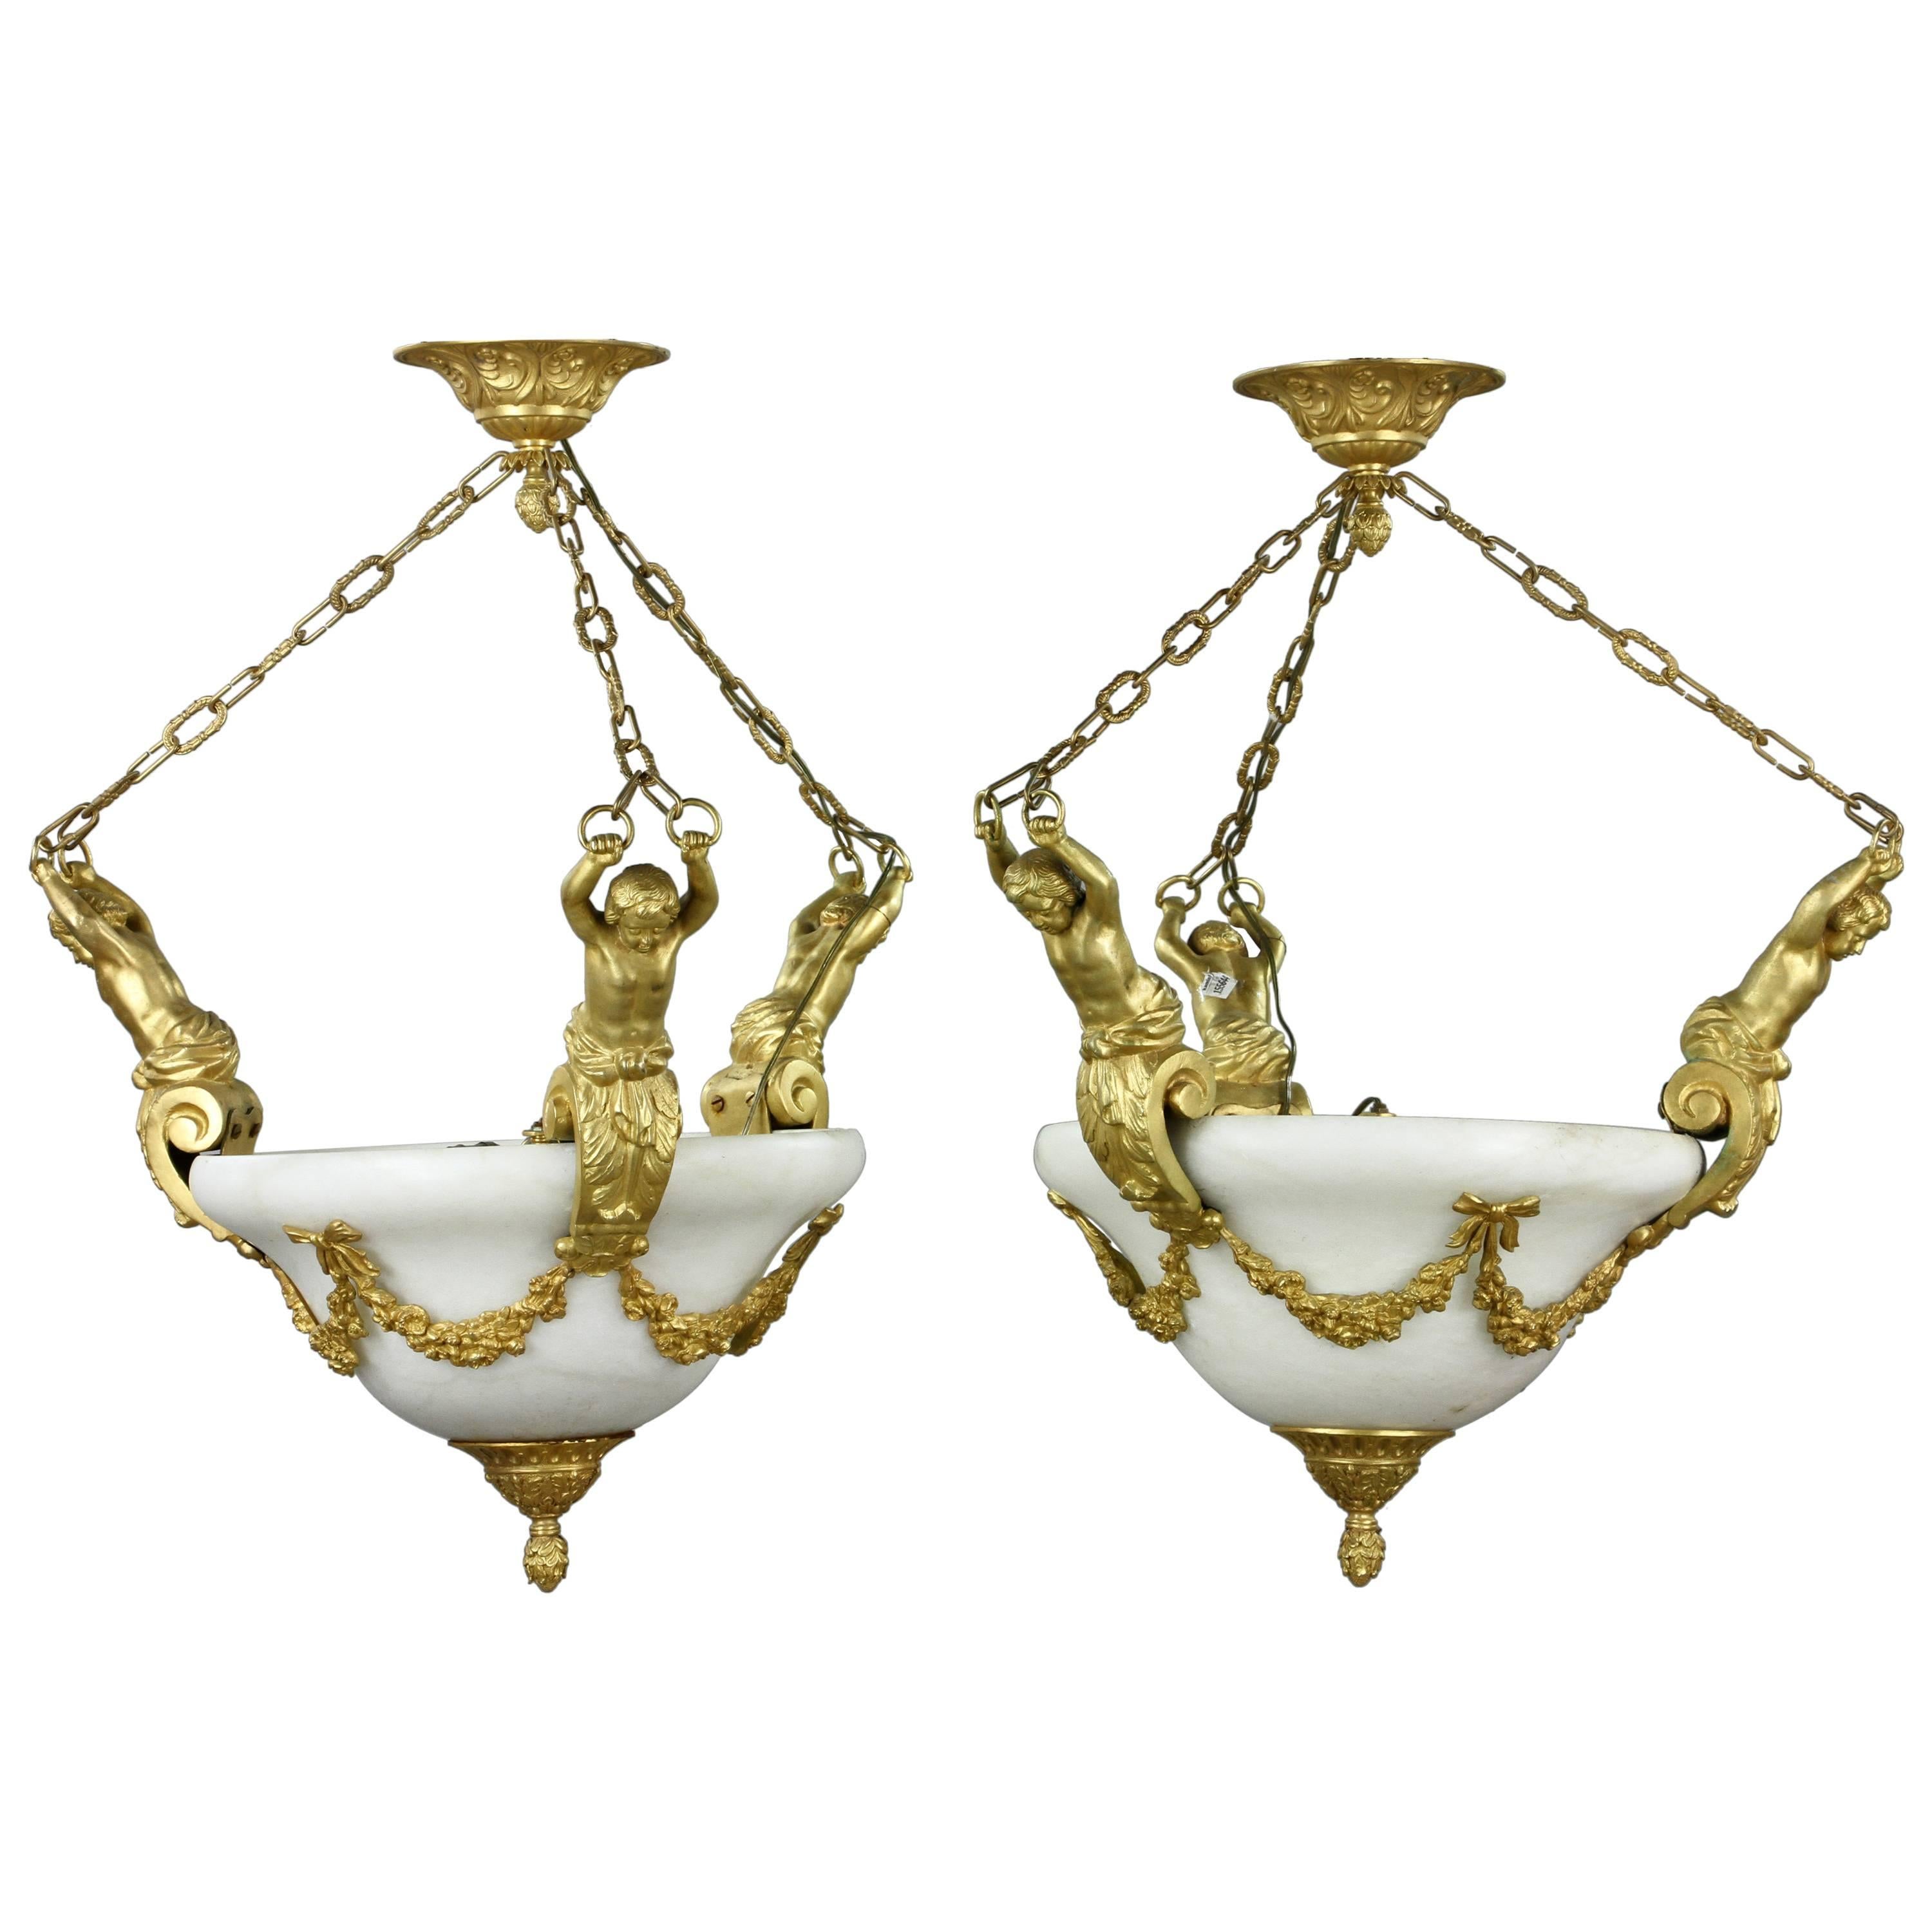 Pair of 19th Century French Gilt Bronze and Marble Louis XVI Chandeliers